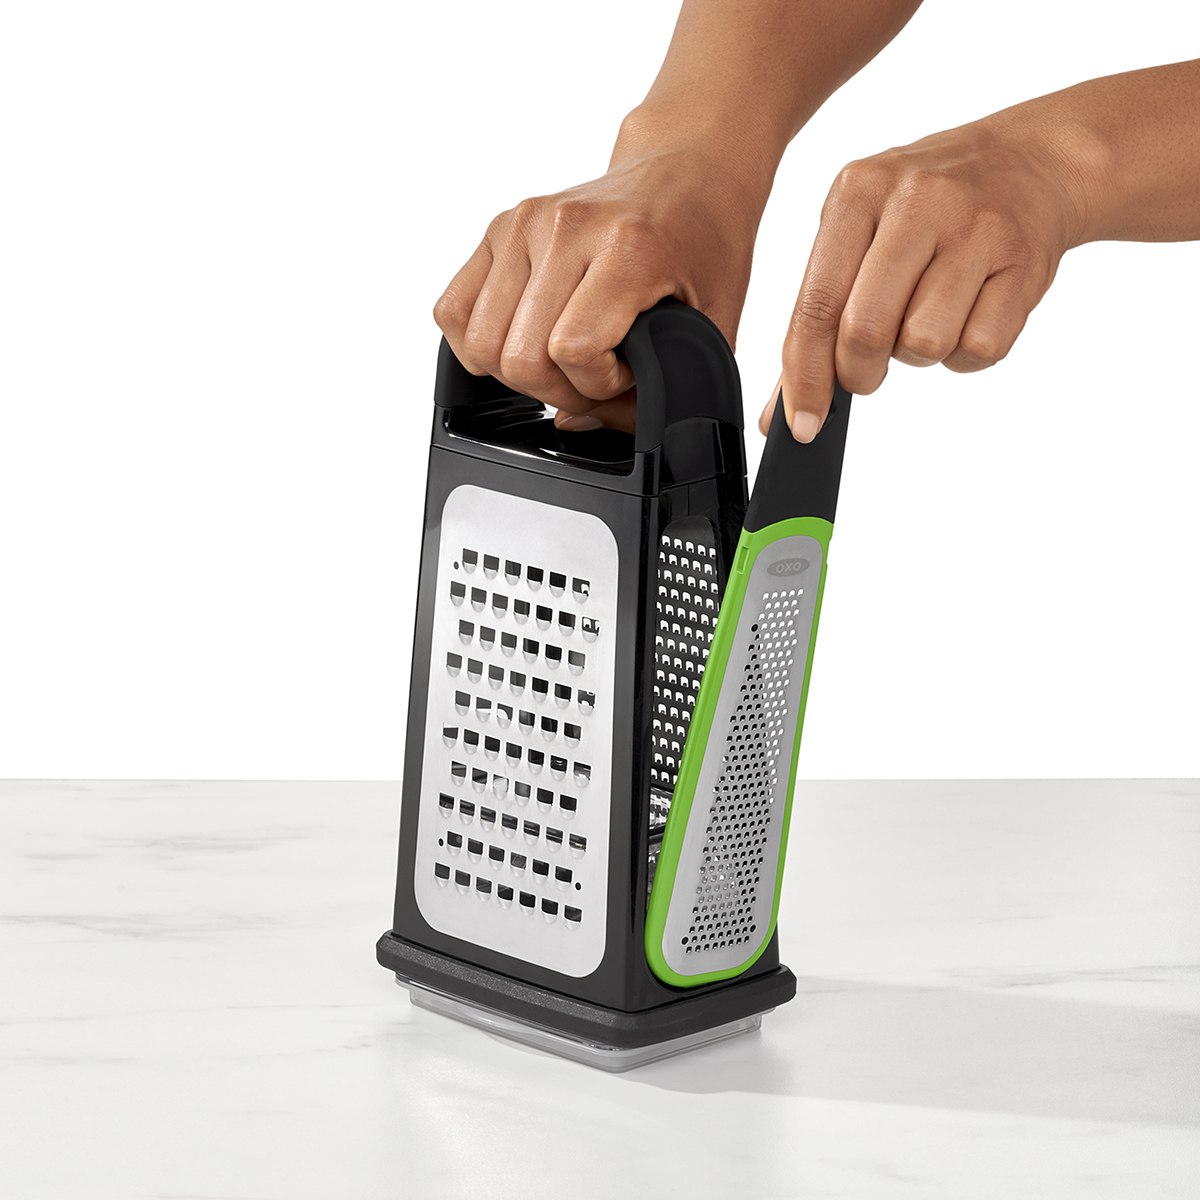 https://www.containerstore.com/catalogimages/425008/10086166-OXO-Box-Grater-VEN7.jpg